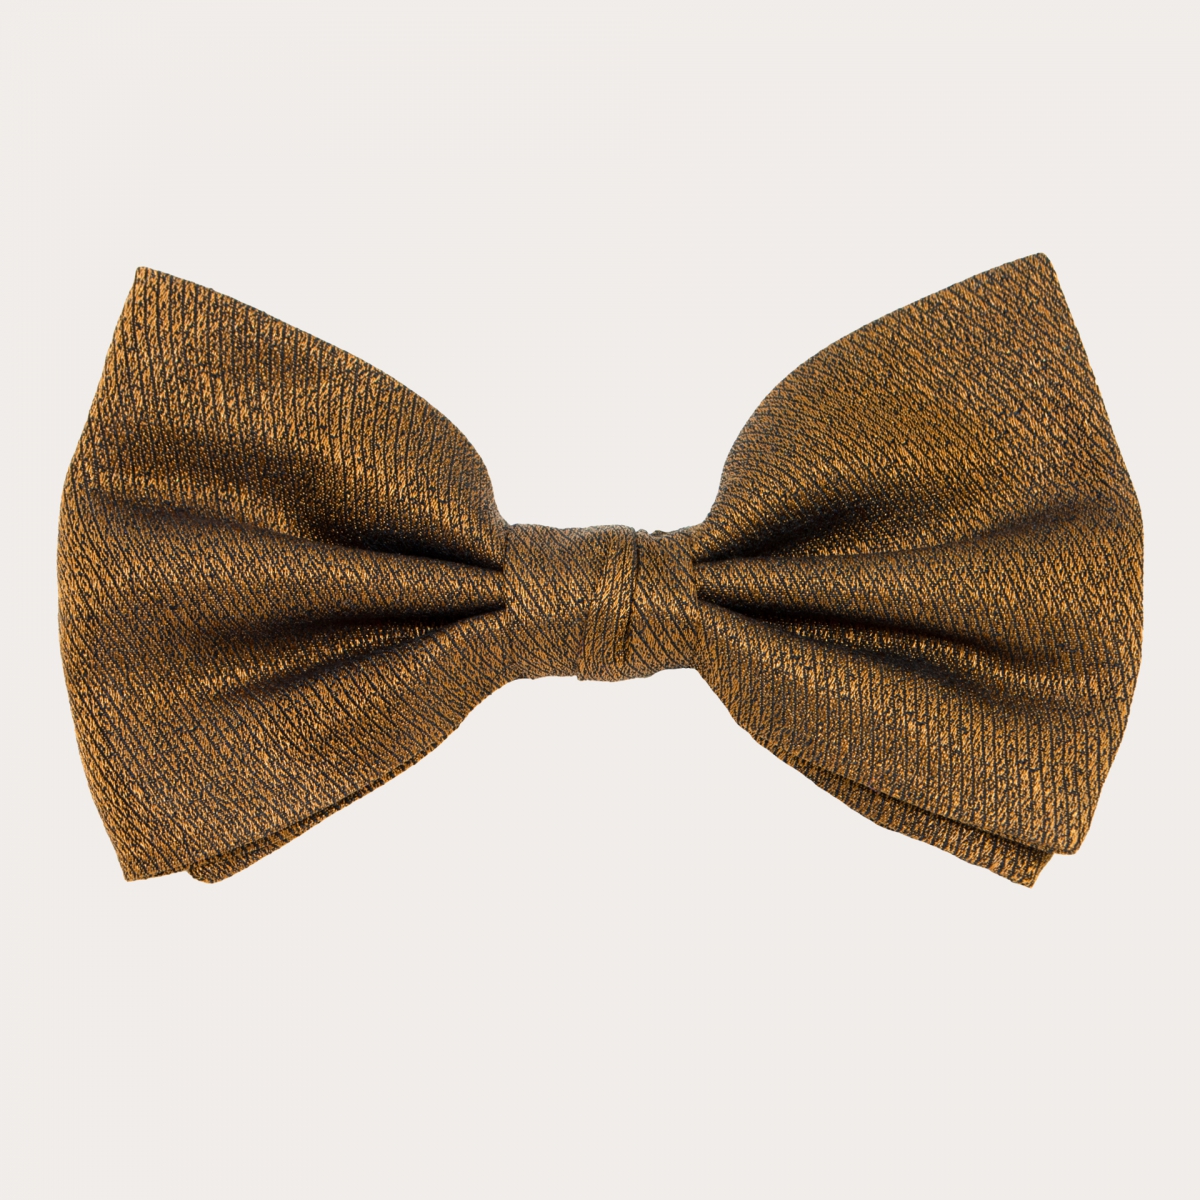 BRUCLE Set of suspenders and matching bow tie in fine gold jacquard silk